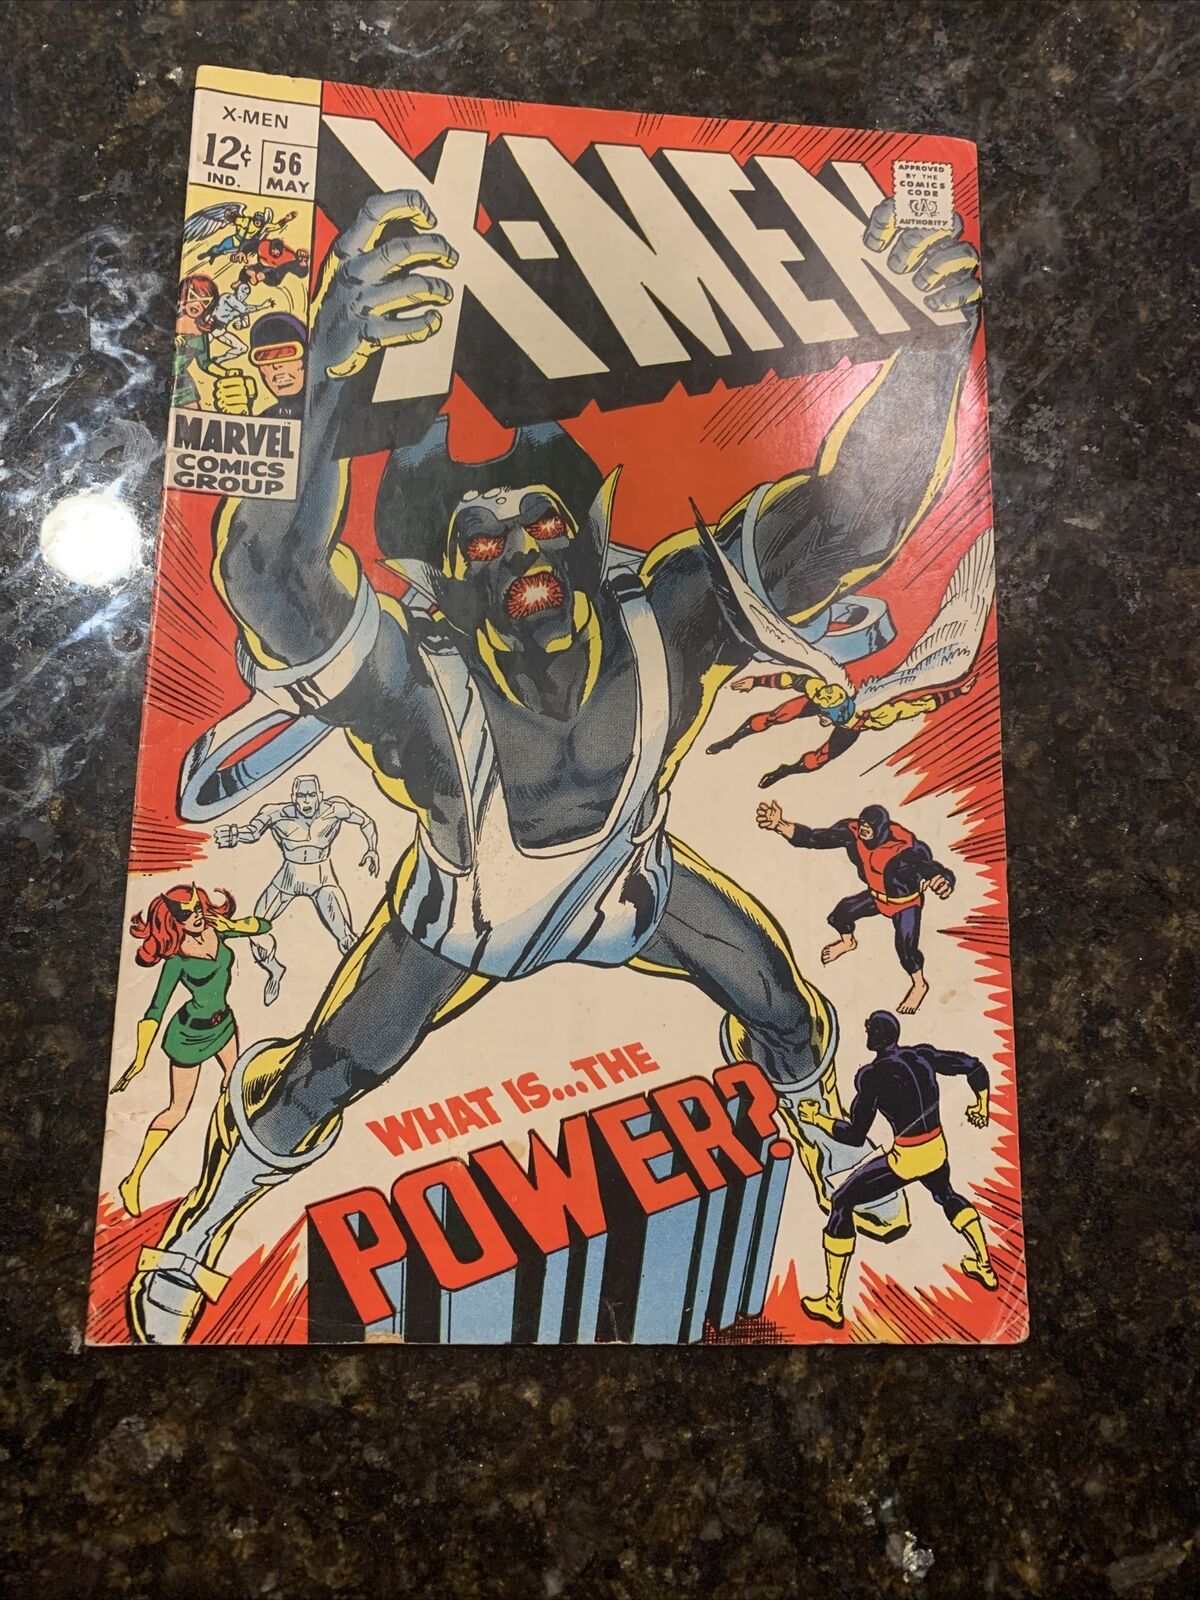 Uncanny X-Men #56 - VG/FN Condition, Glossy Cover